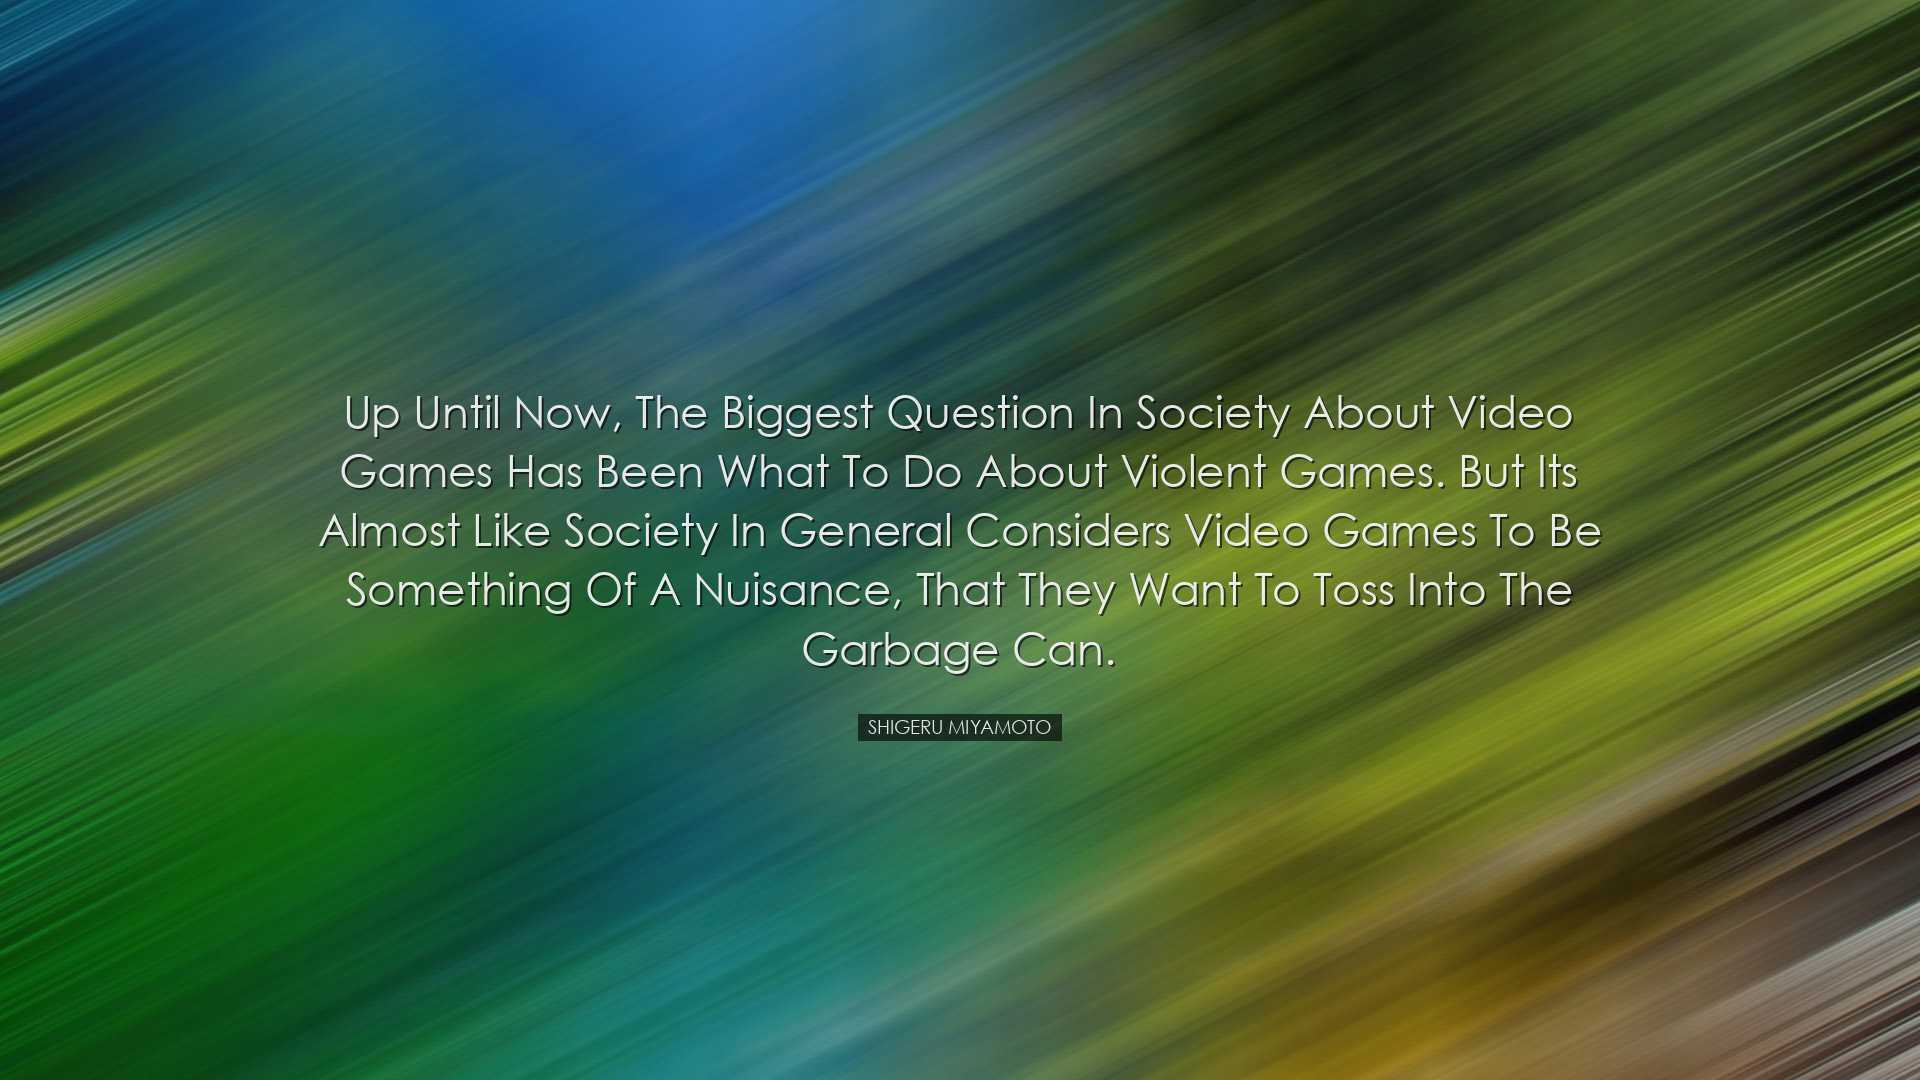 Up until now, the biggest question in society about video games ha